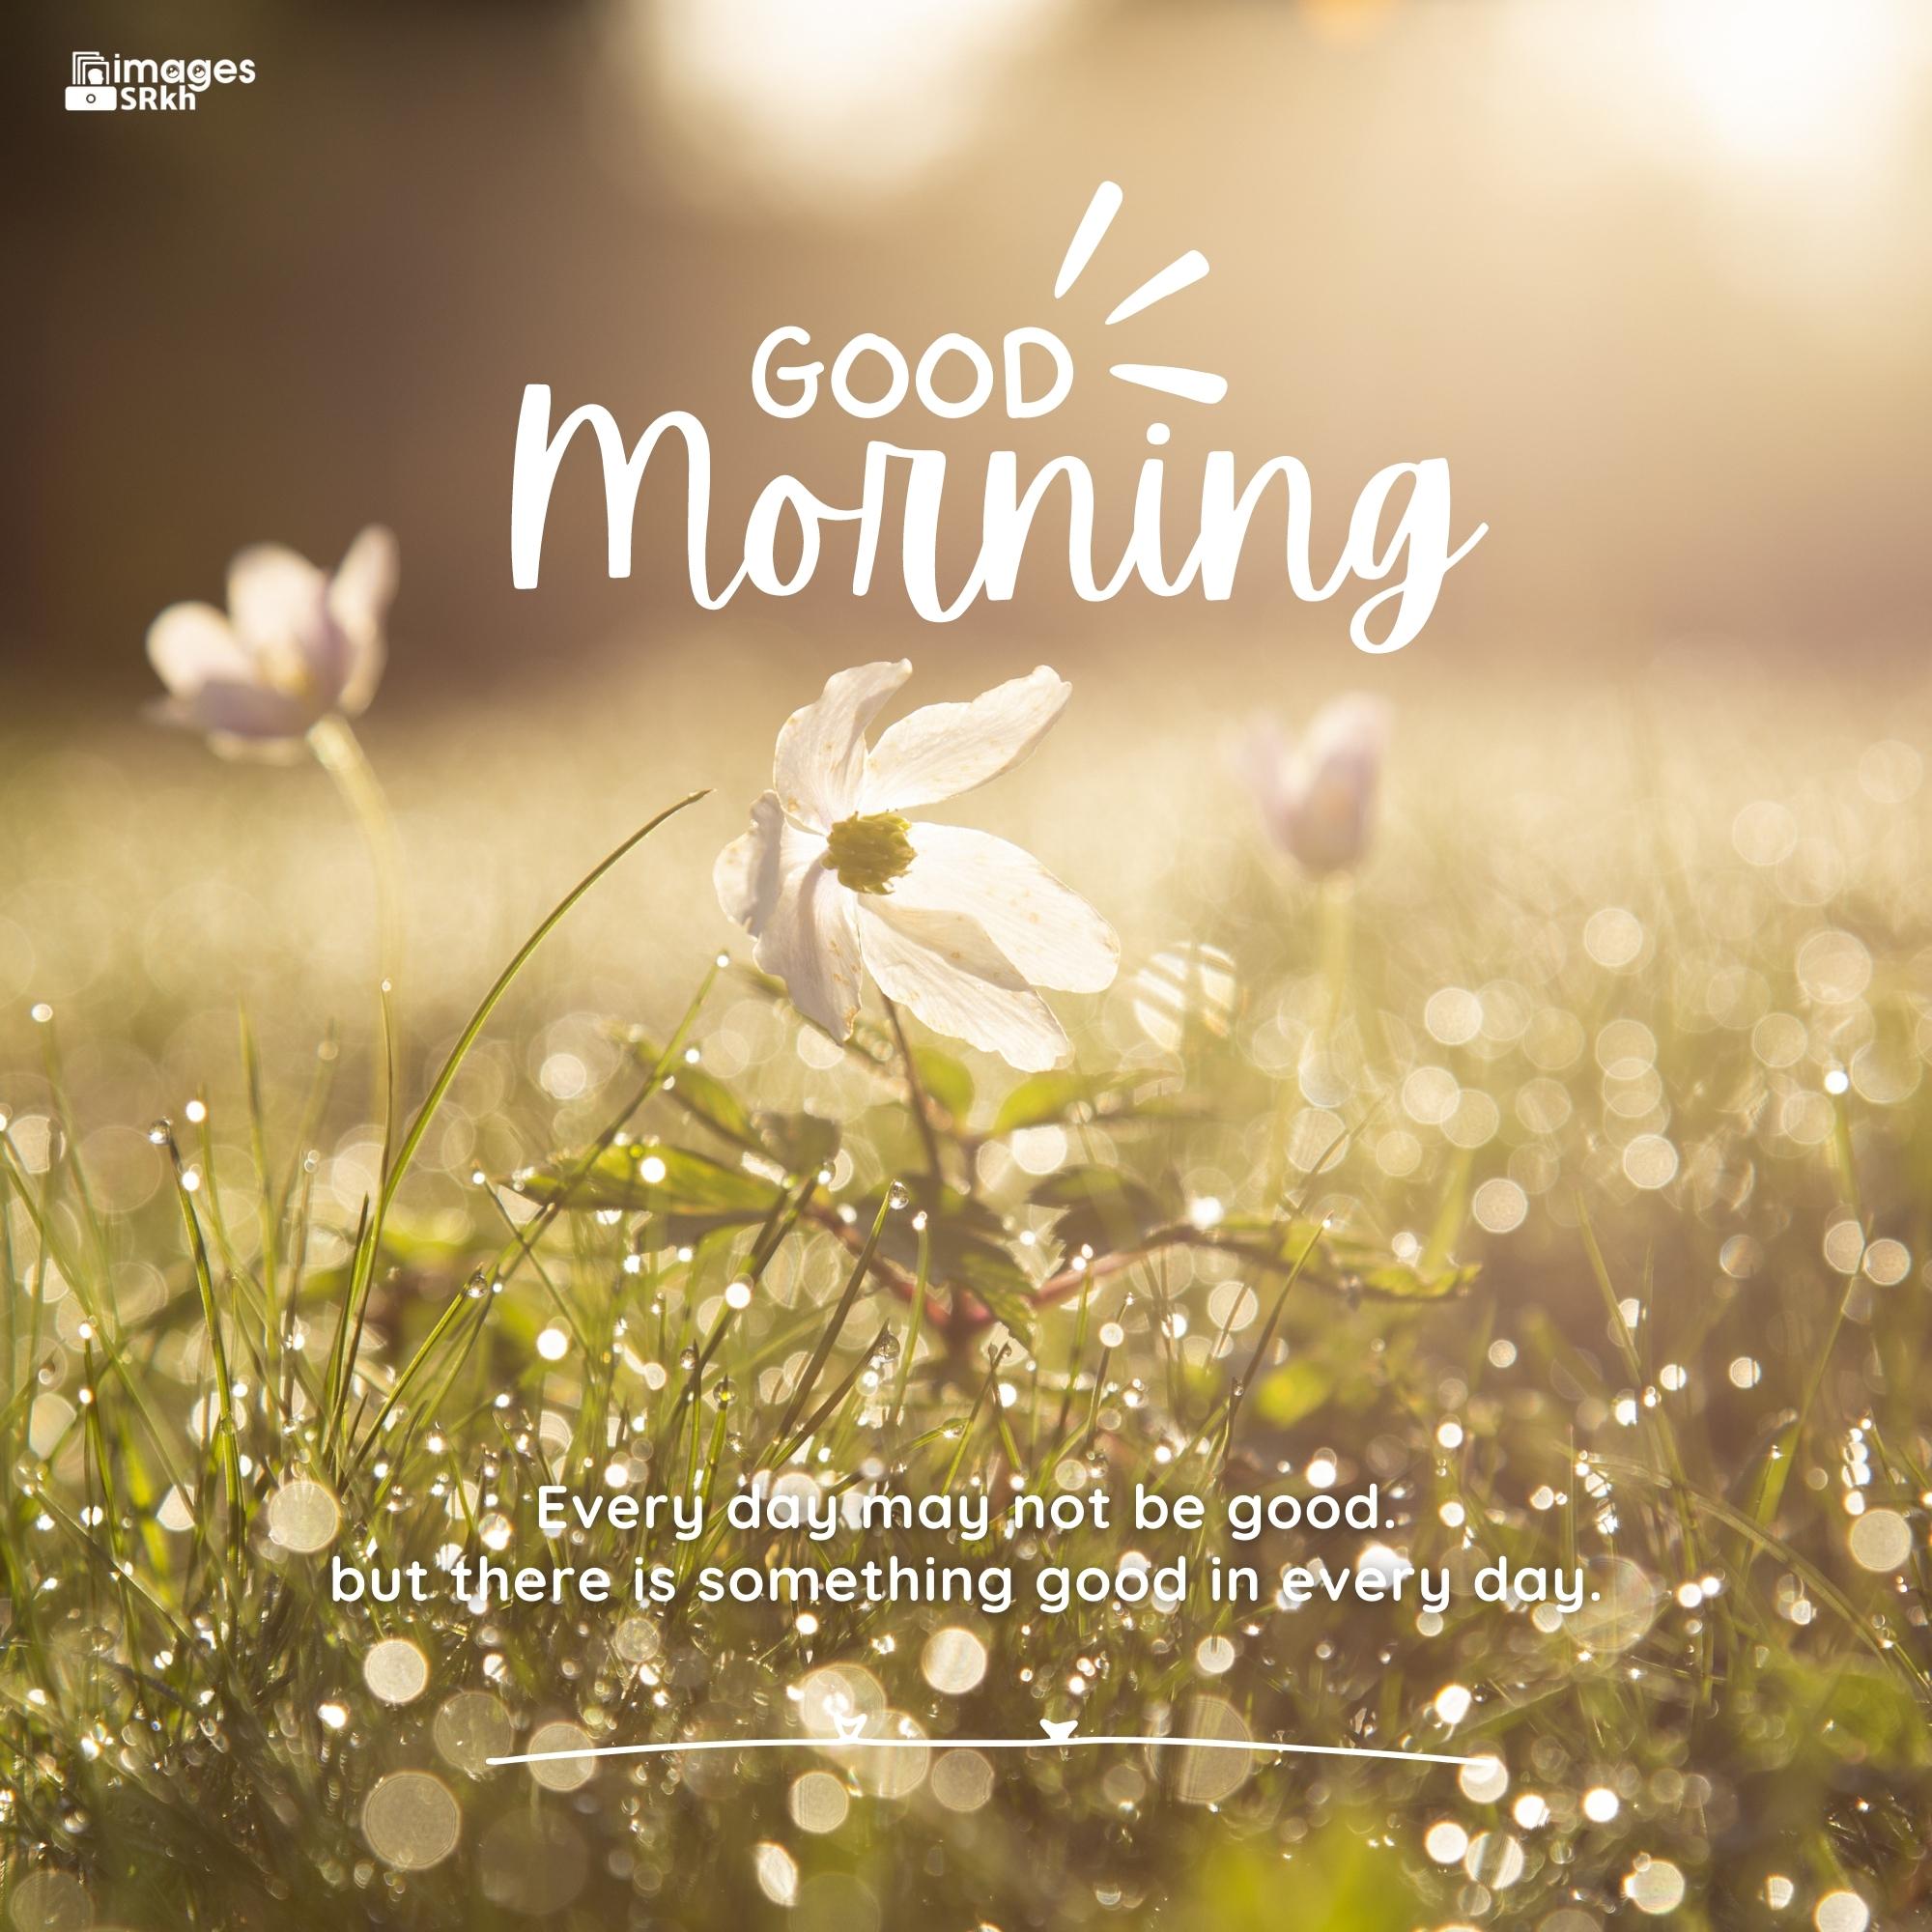 Good Morning Images For Ppt full hd